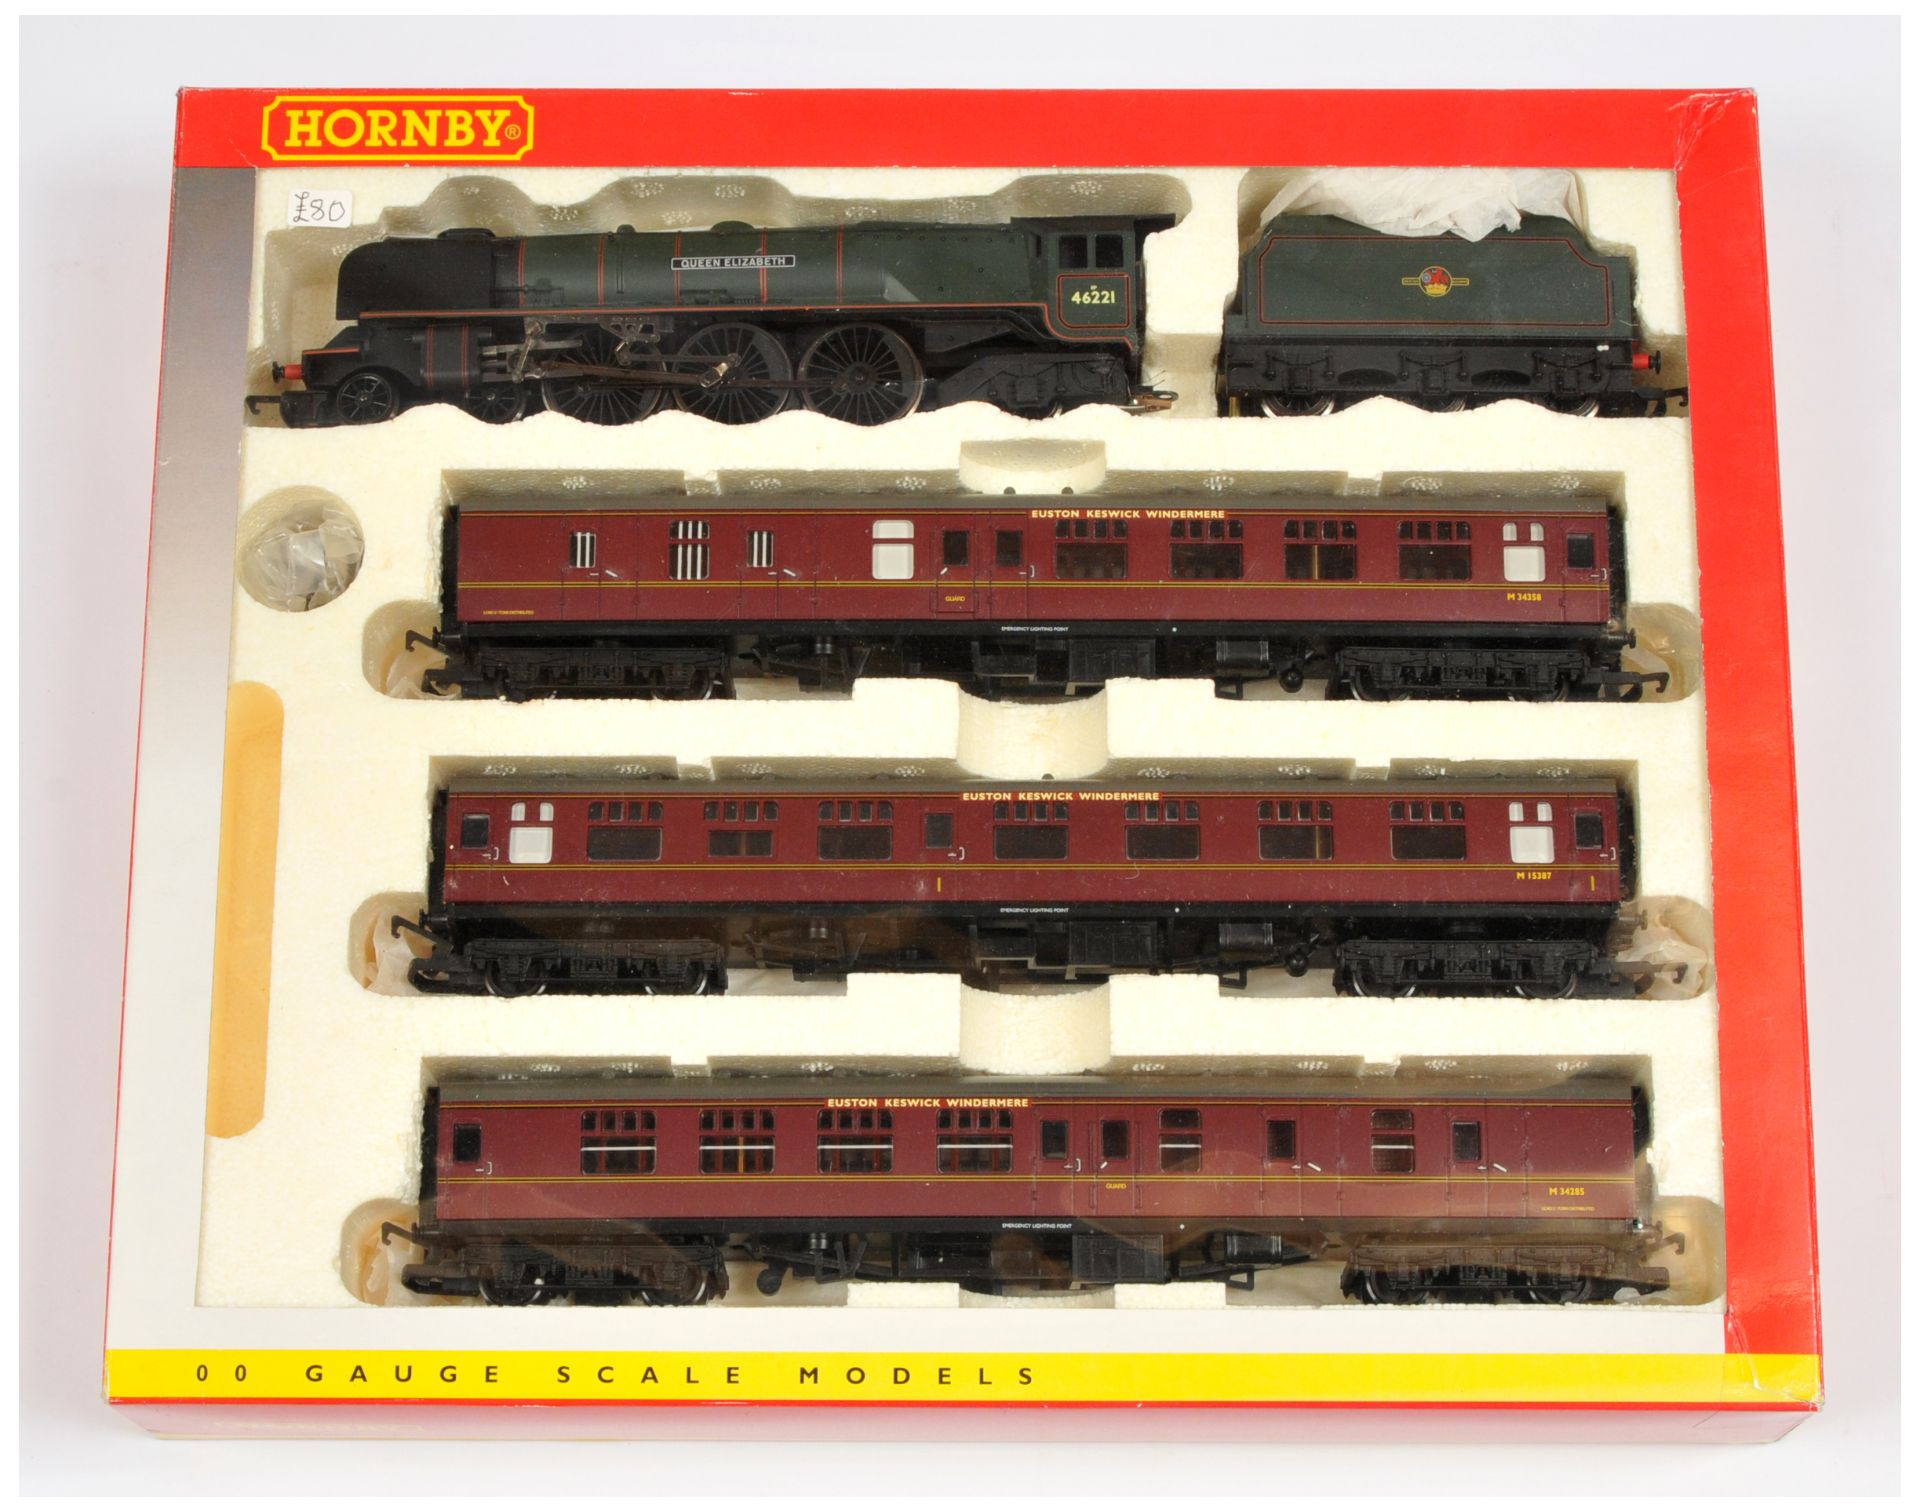 Hornby (China) R2176M (Limited Edition) "The Lakes Express" Train Pack 